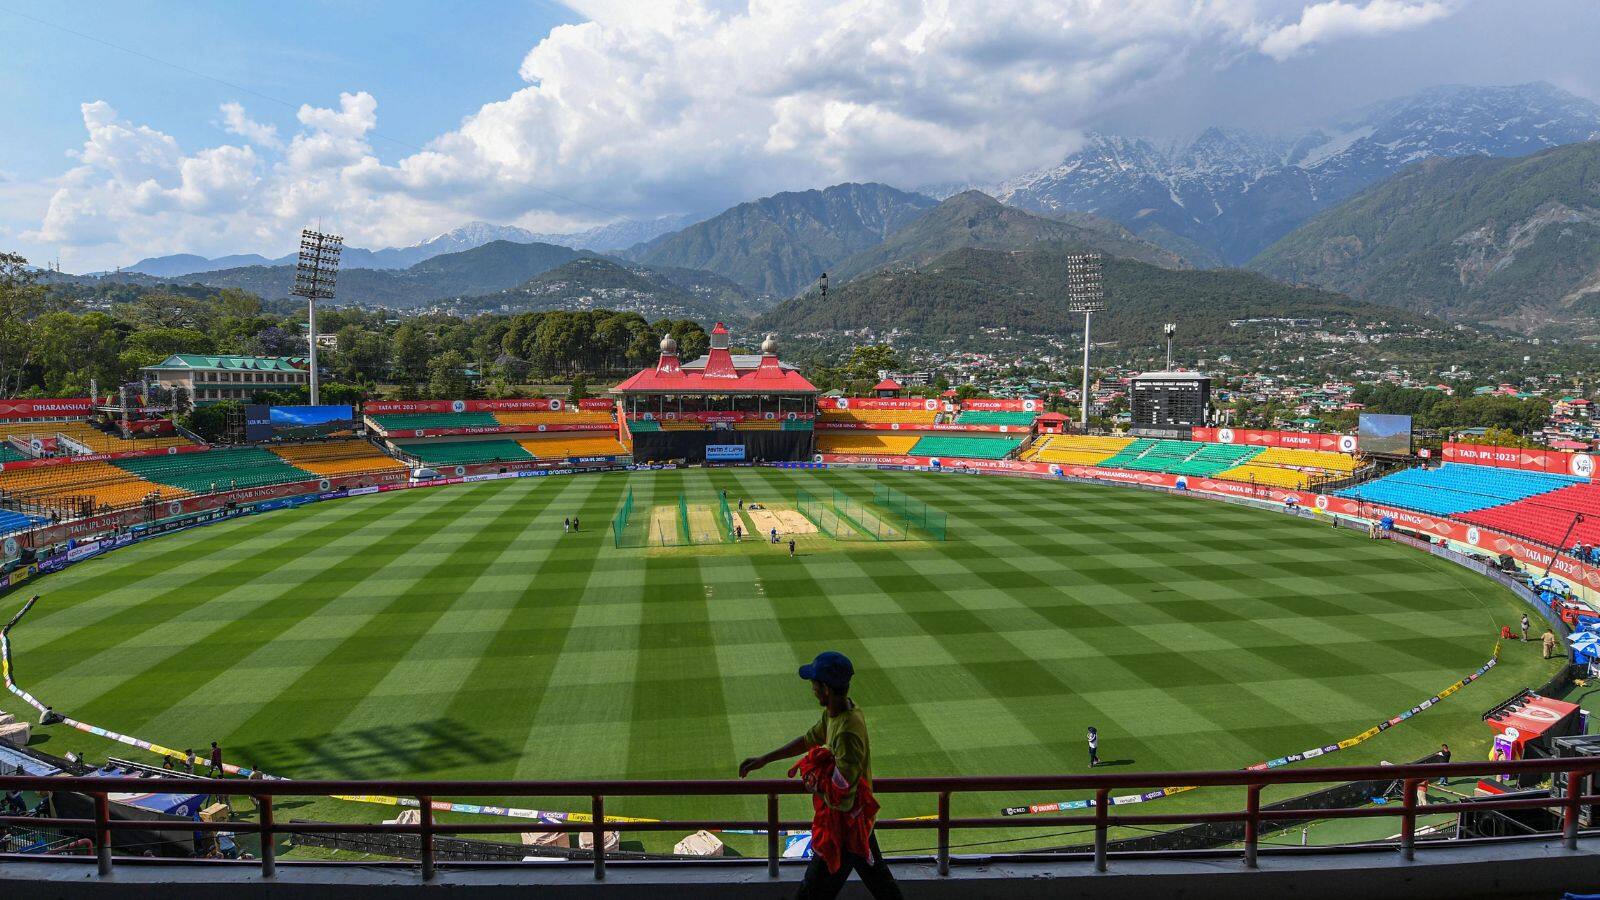 HPCA Stadium Dharamsala Weather Report For AUS vs NZ World Cup Match